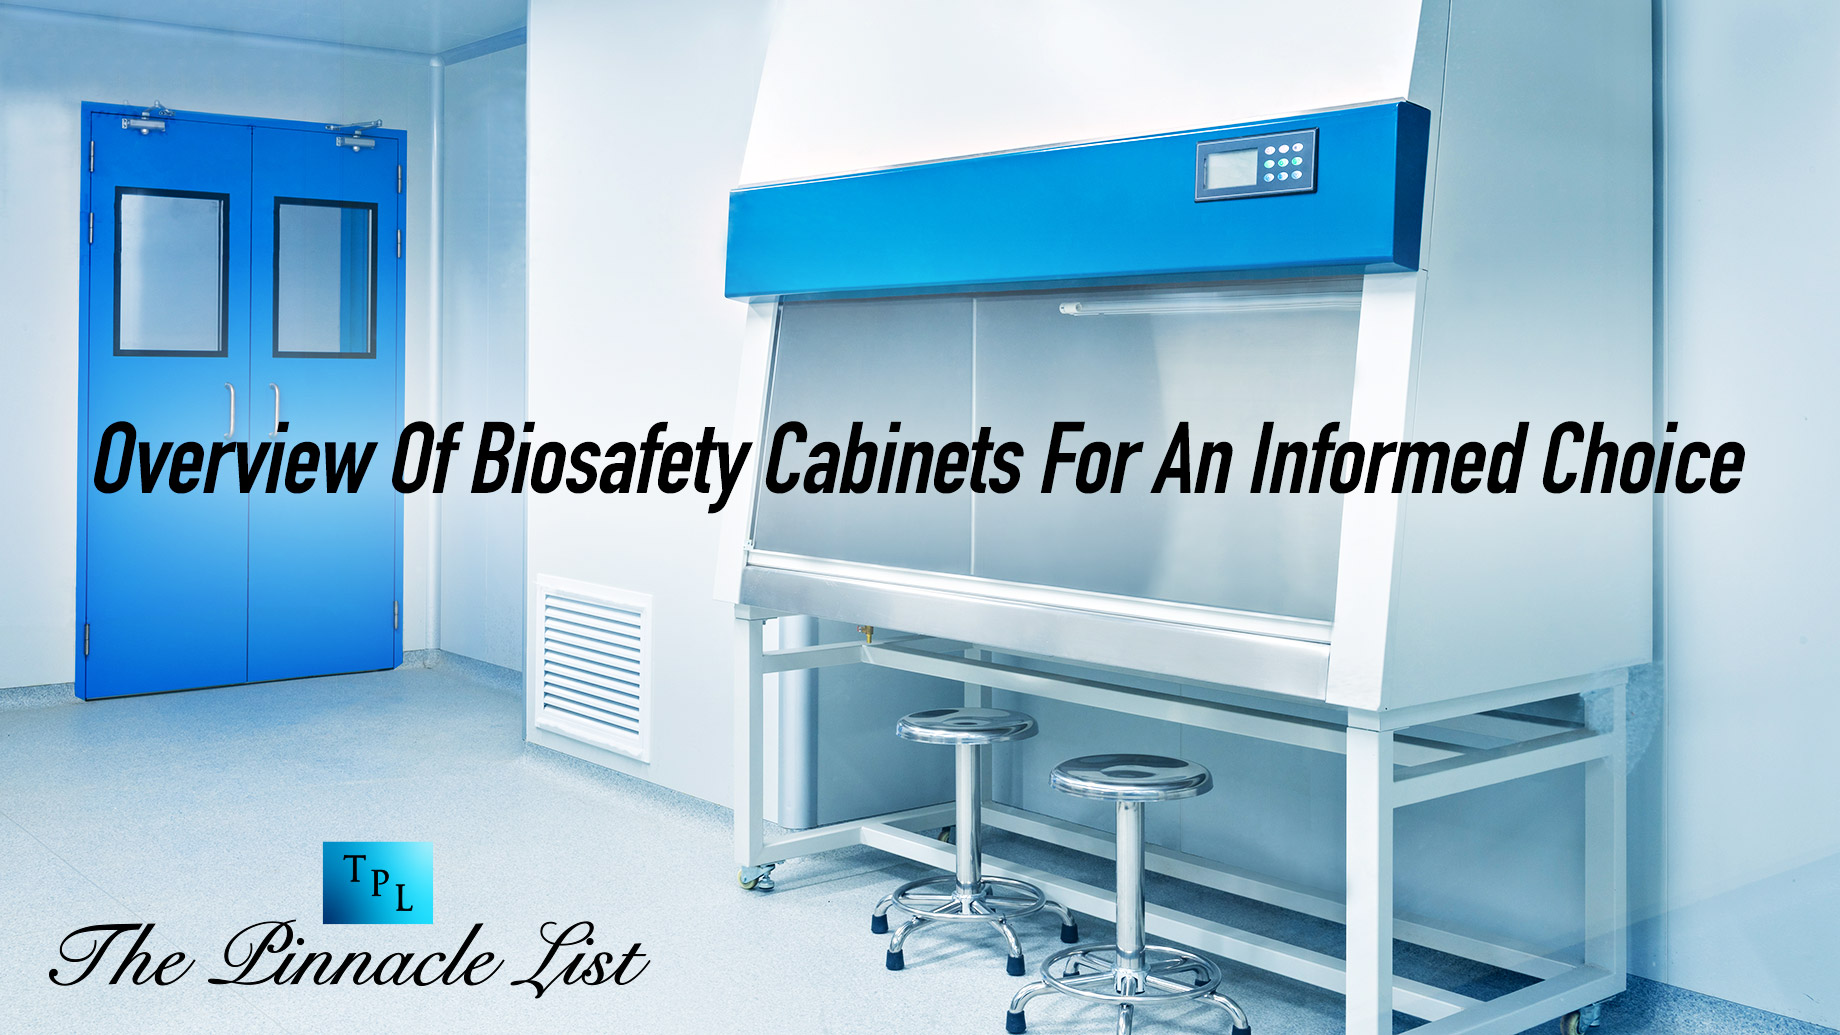 Overview Of Biosafety Cabinets For An Informed Choice